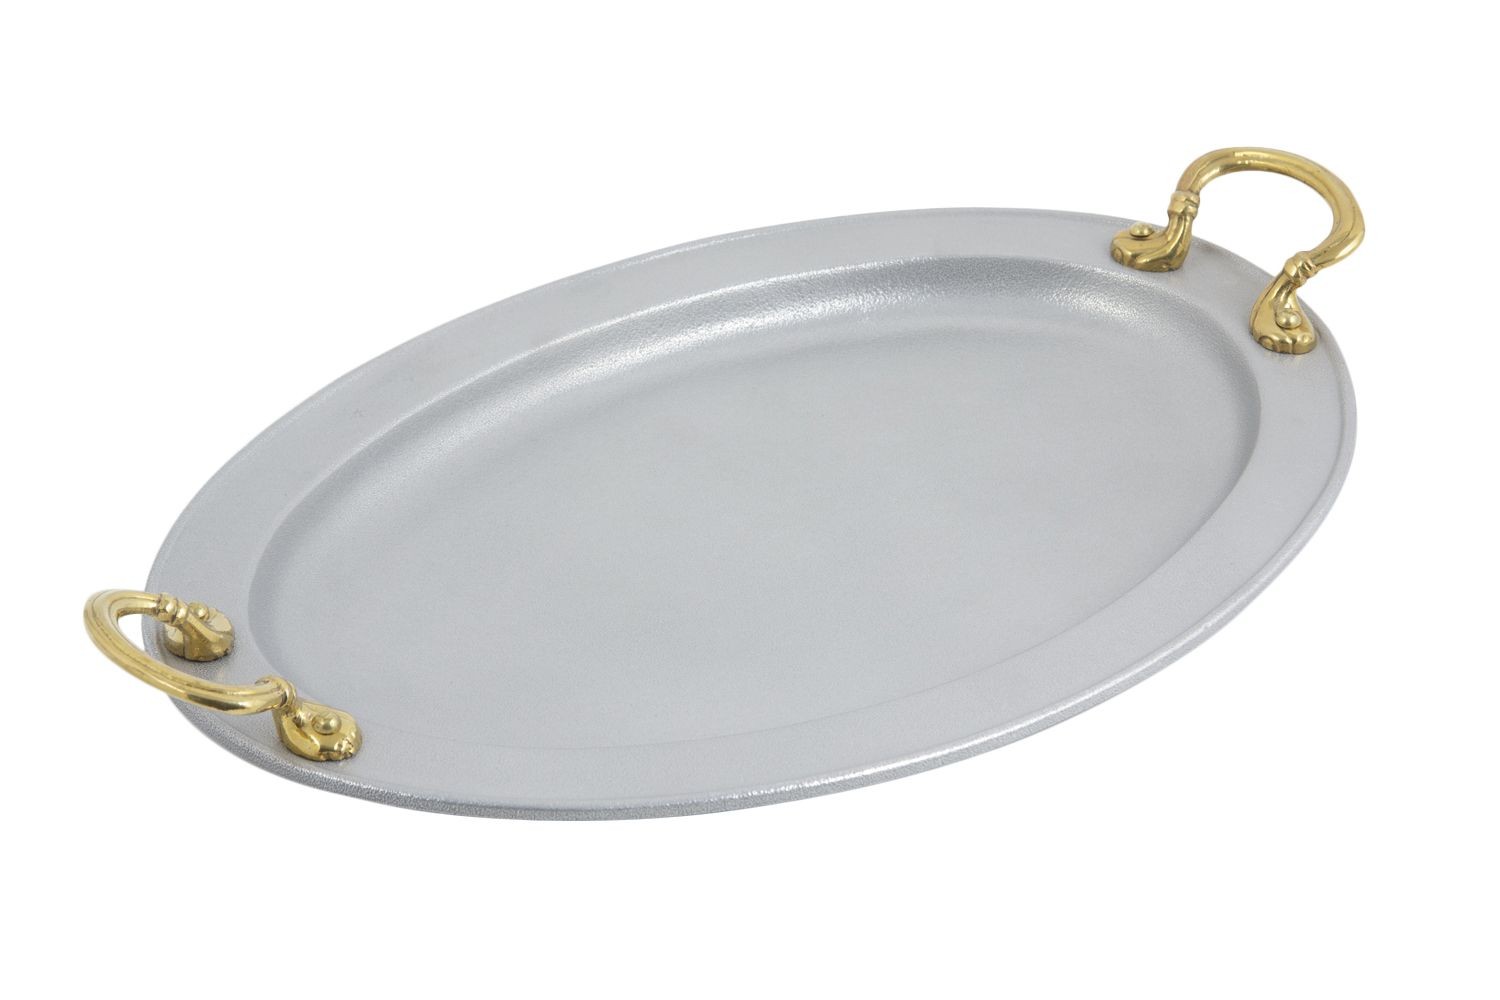 Bon Chef 2045HRP Oval Platter with Round Handles, Pewter Glo 14 1/4" x 20 1/4"